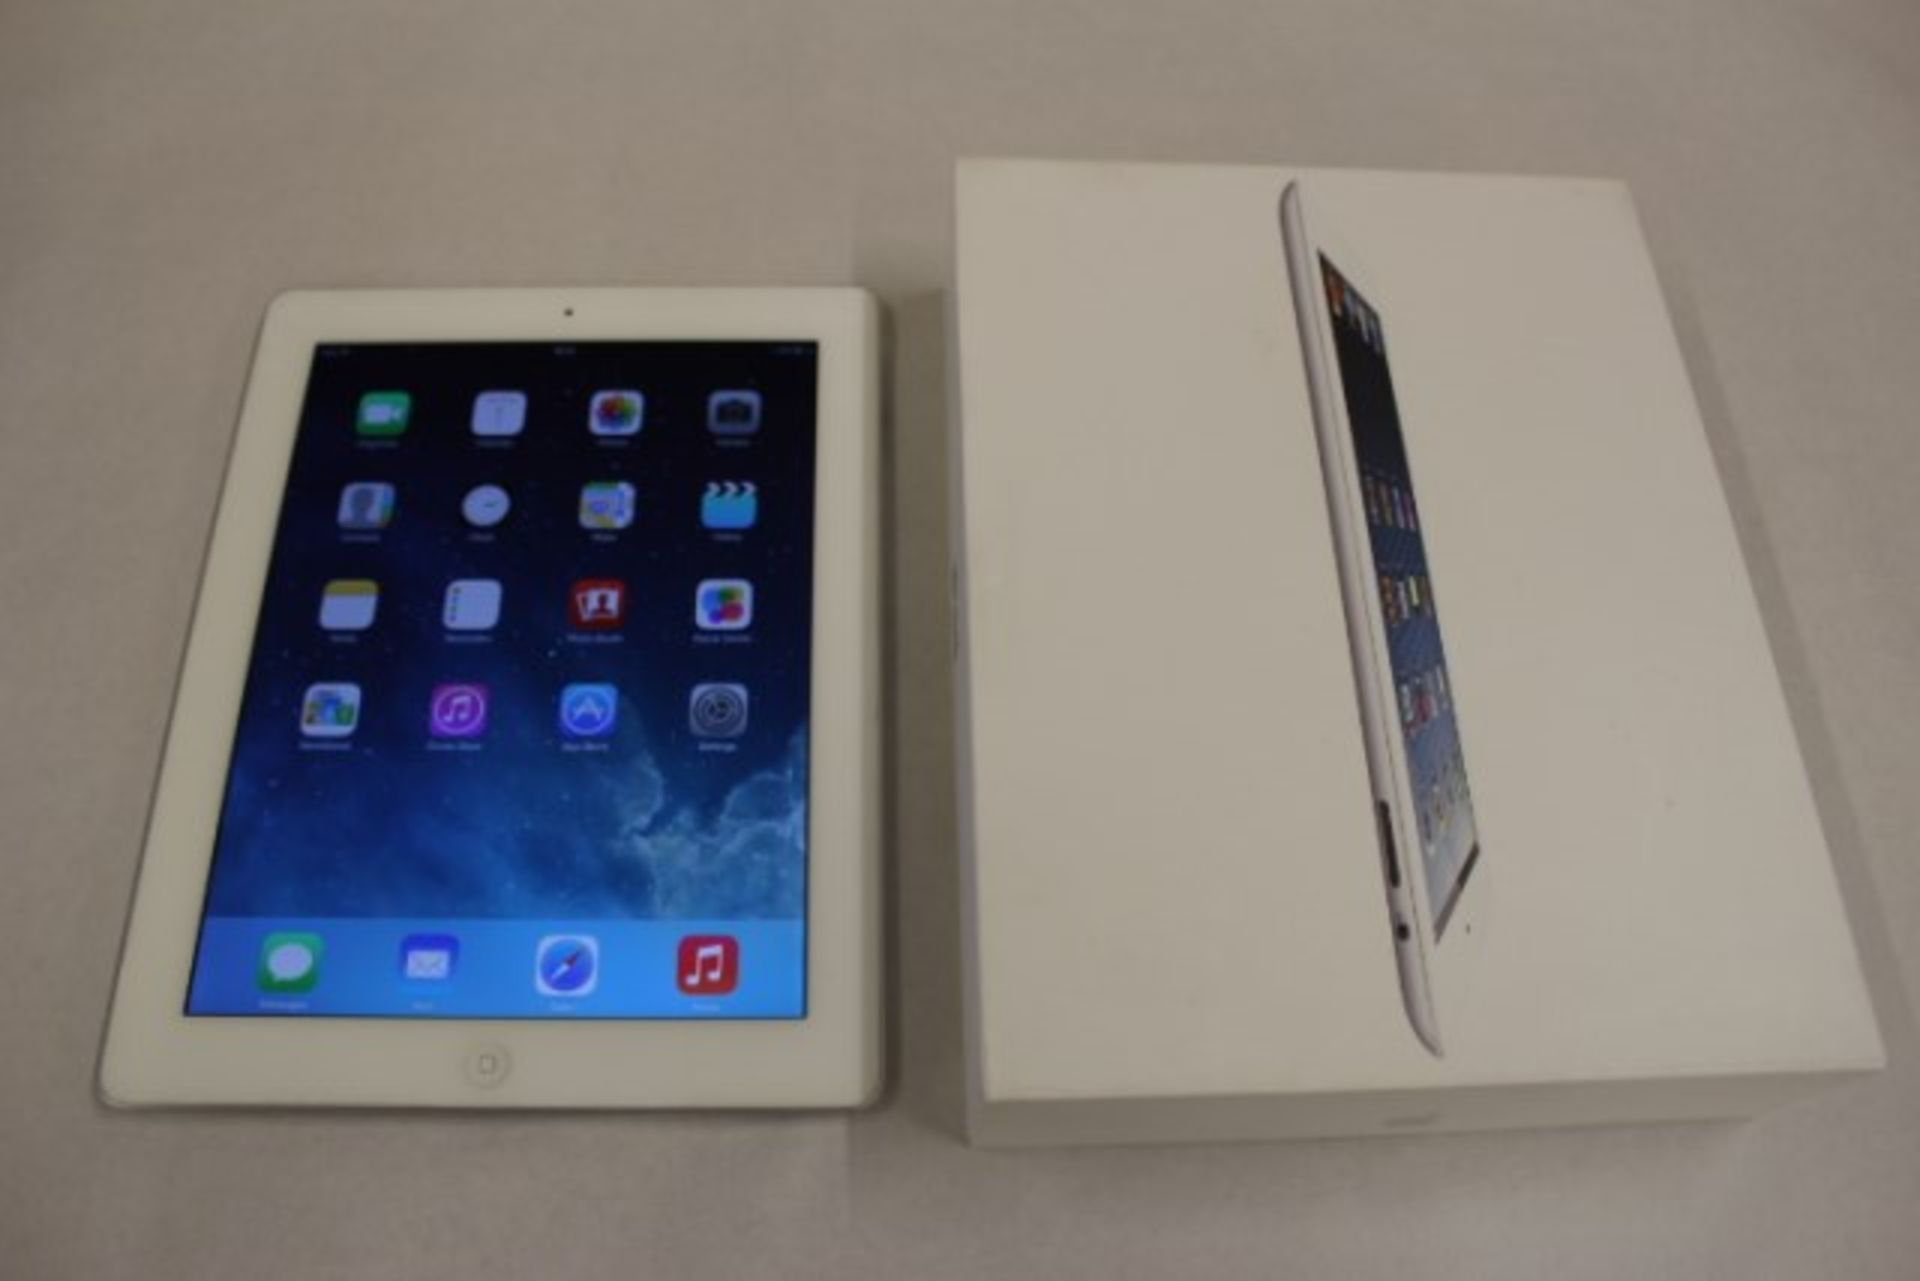 V iPad 4 16Gb Black With Two Cameras/Retina Display With Charger In Original Box - Factory Graded - Image 2 of 2